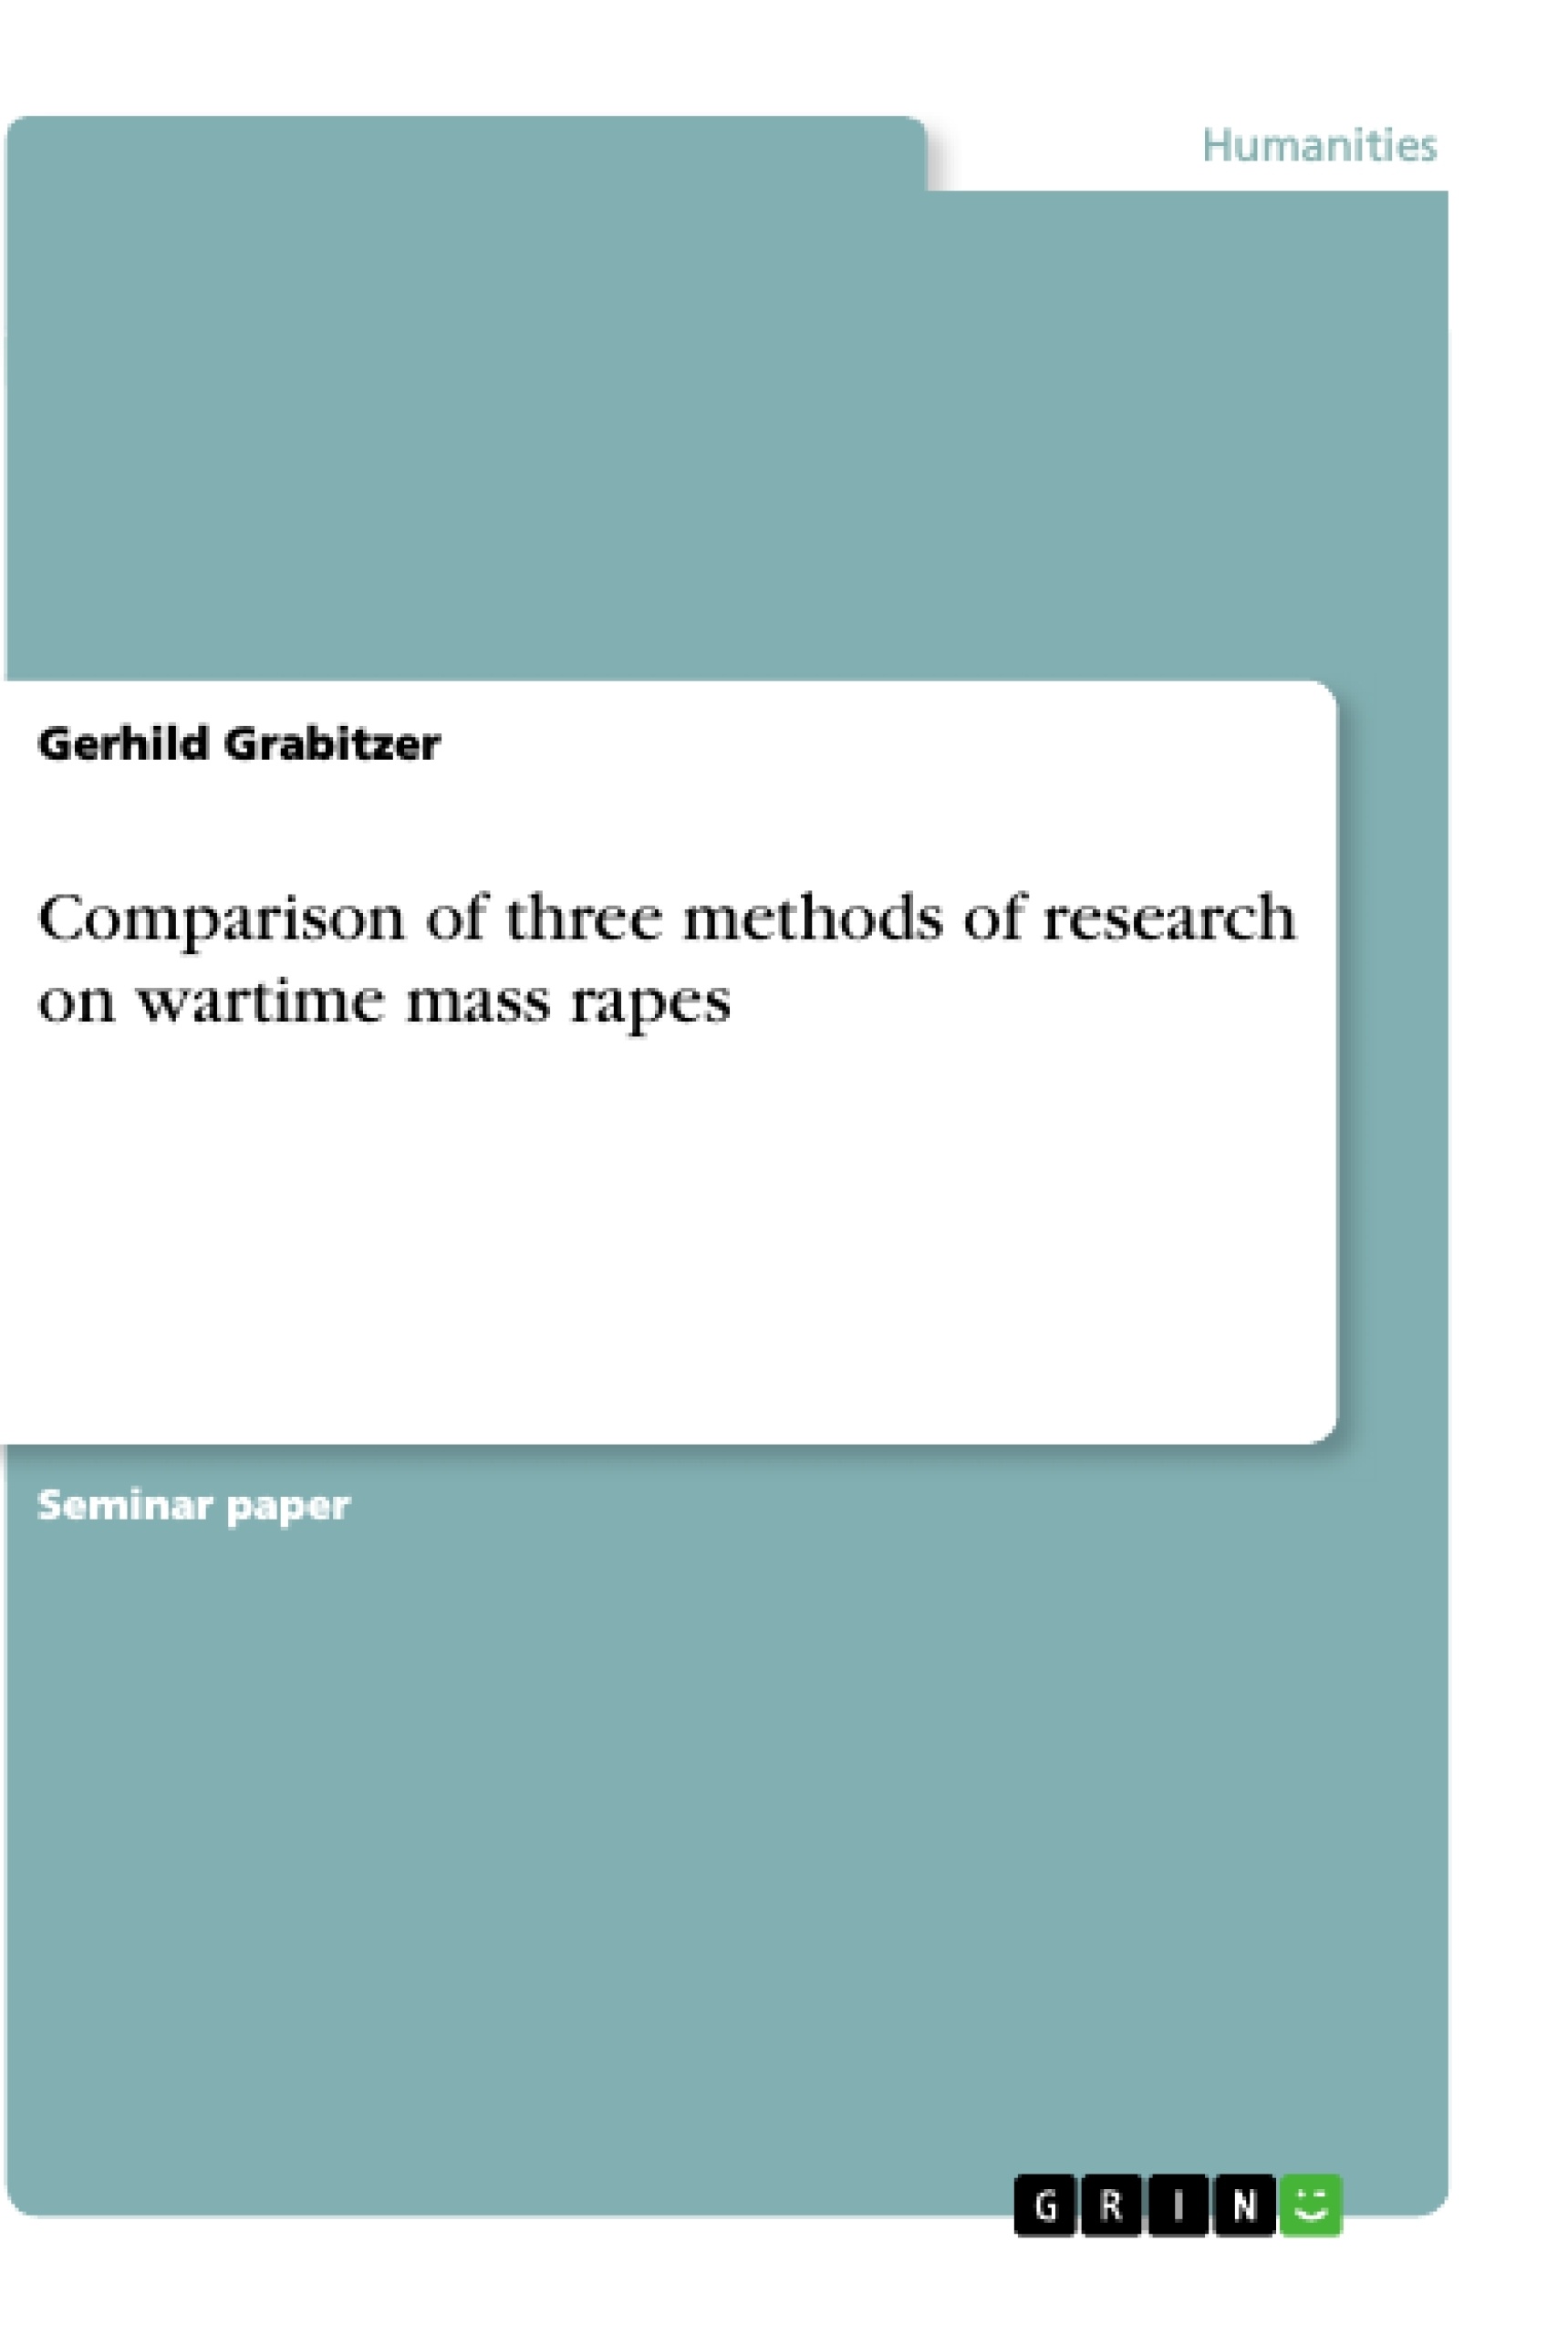 Titel: Comparison of three methods of research on wartime mass rapes